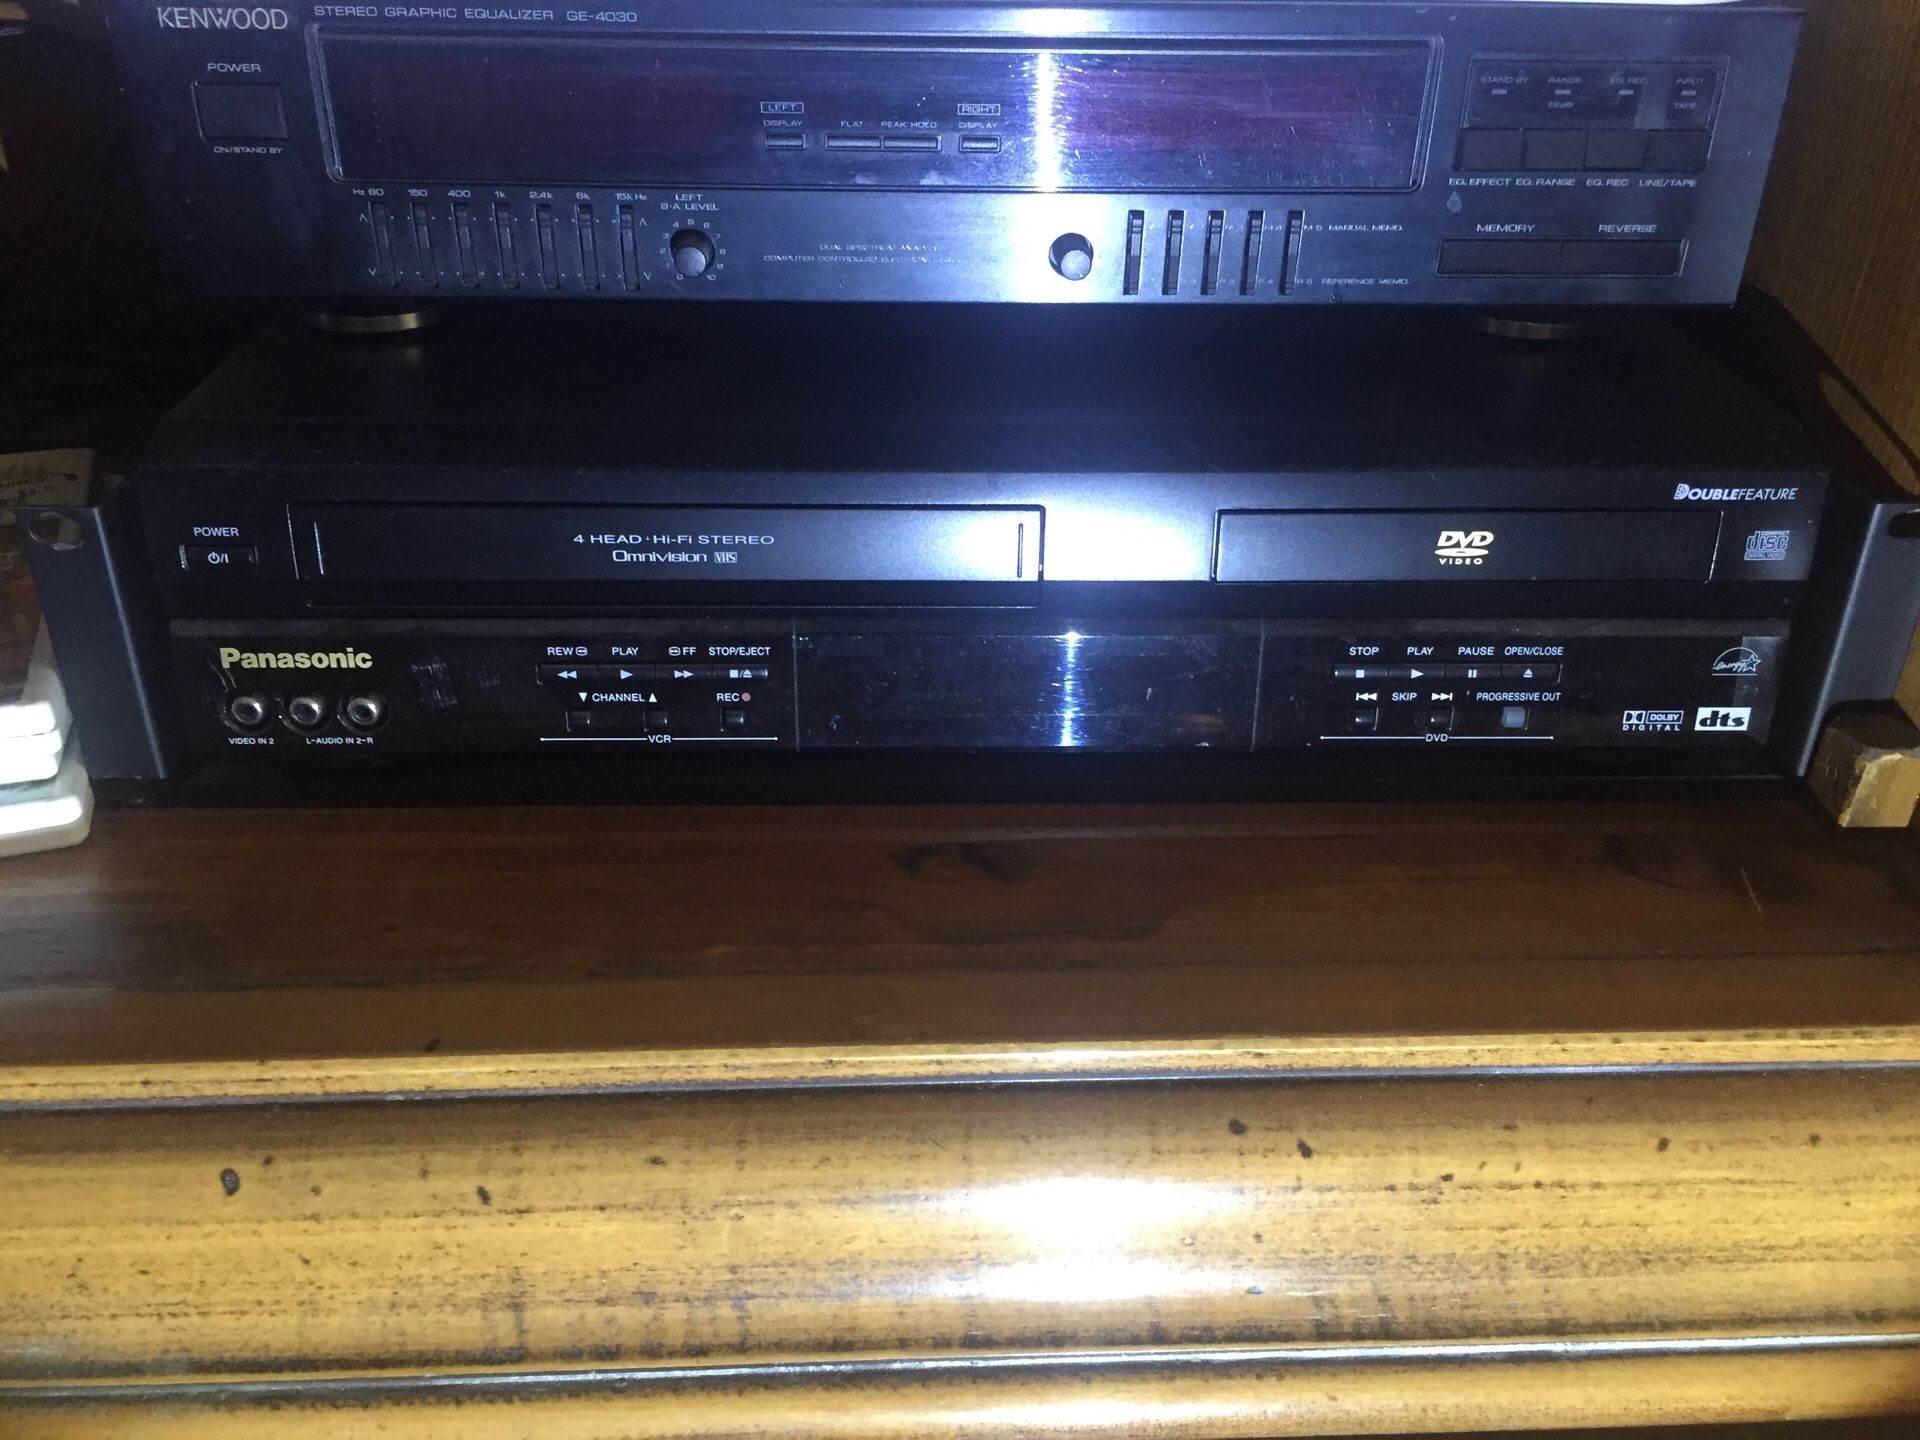 Rack mount VHS DVD Panasonic in perfect condition. Less than 10 hours usage for a conference.